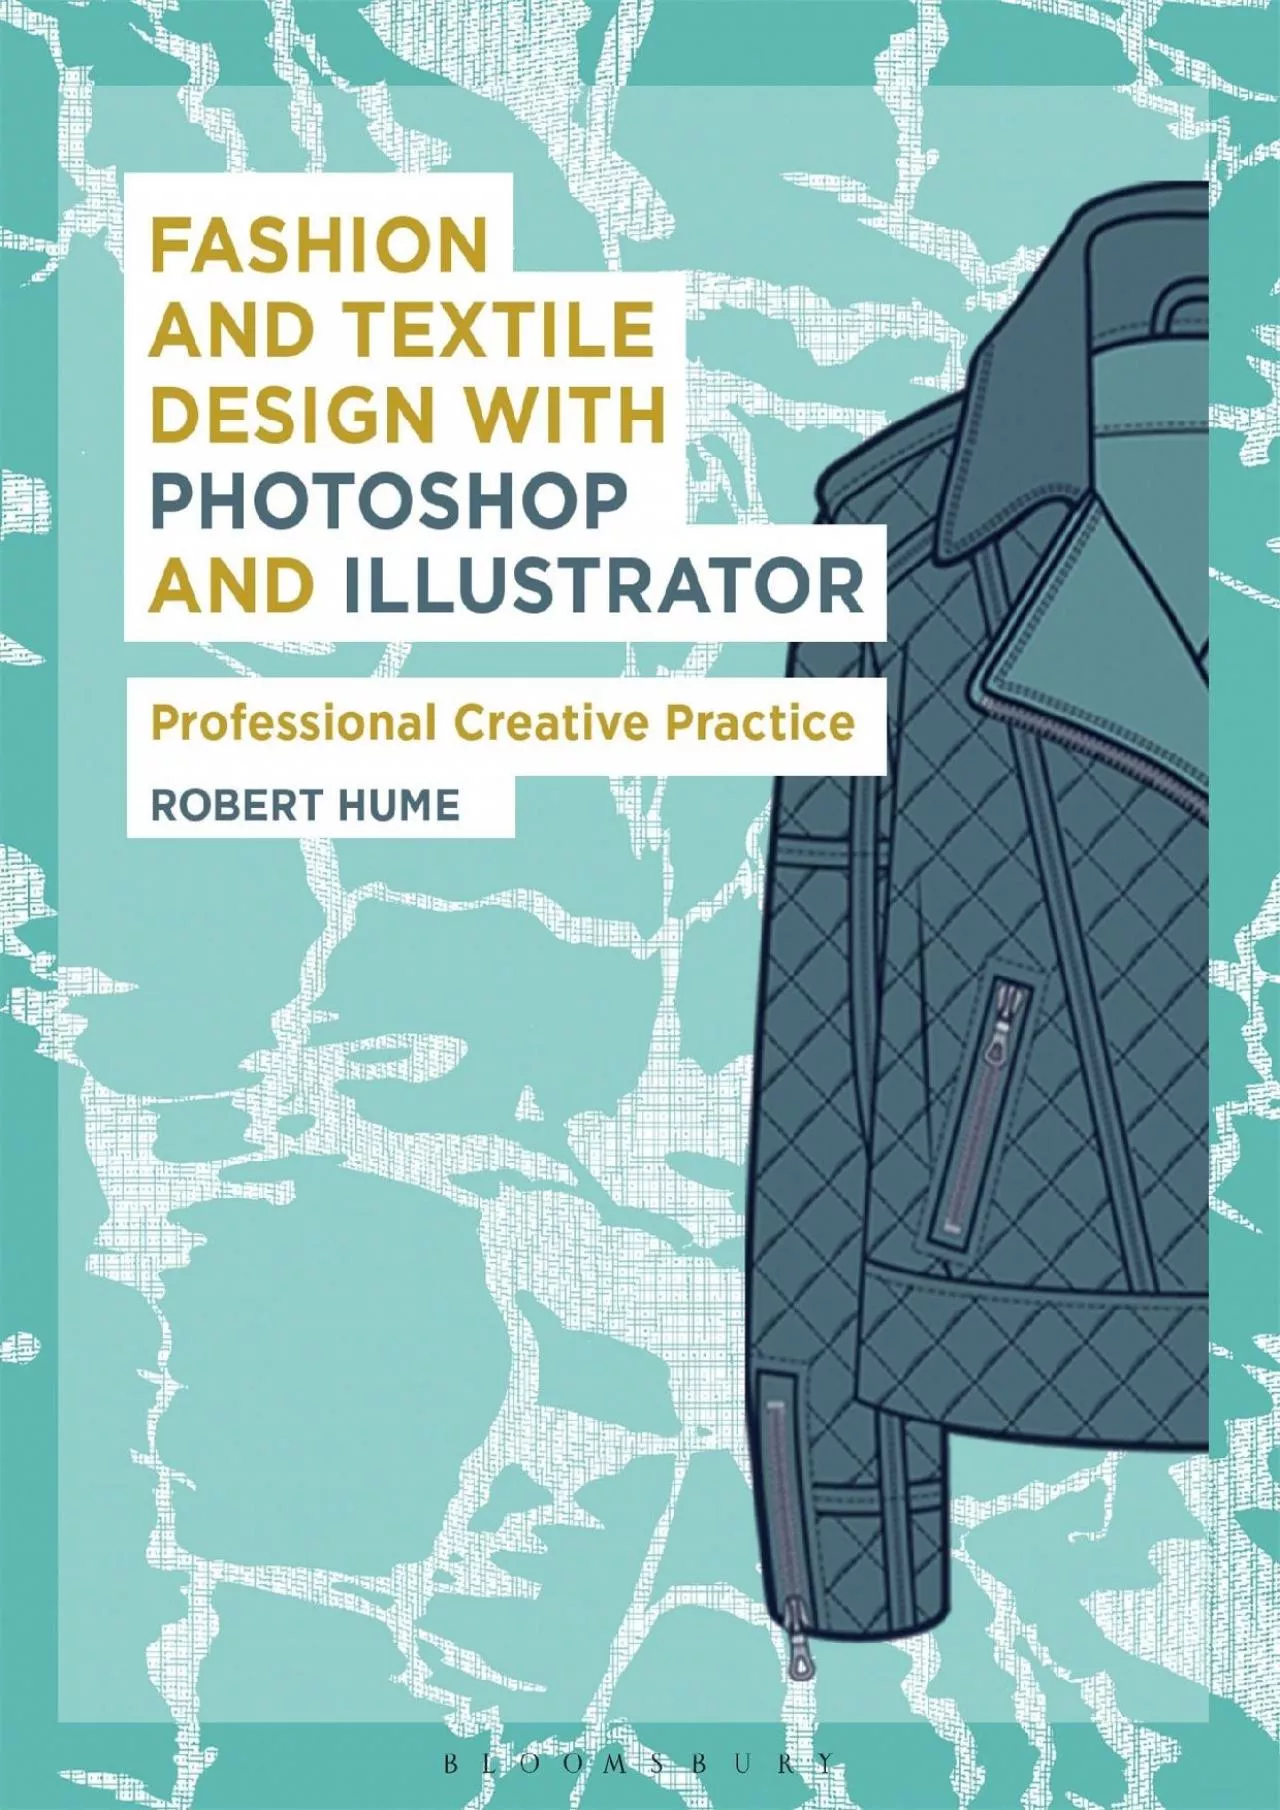 (EBOOK)-Fashion and Textile Design with Photoshop and Illustrator: Professional Creative